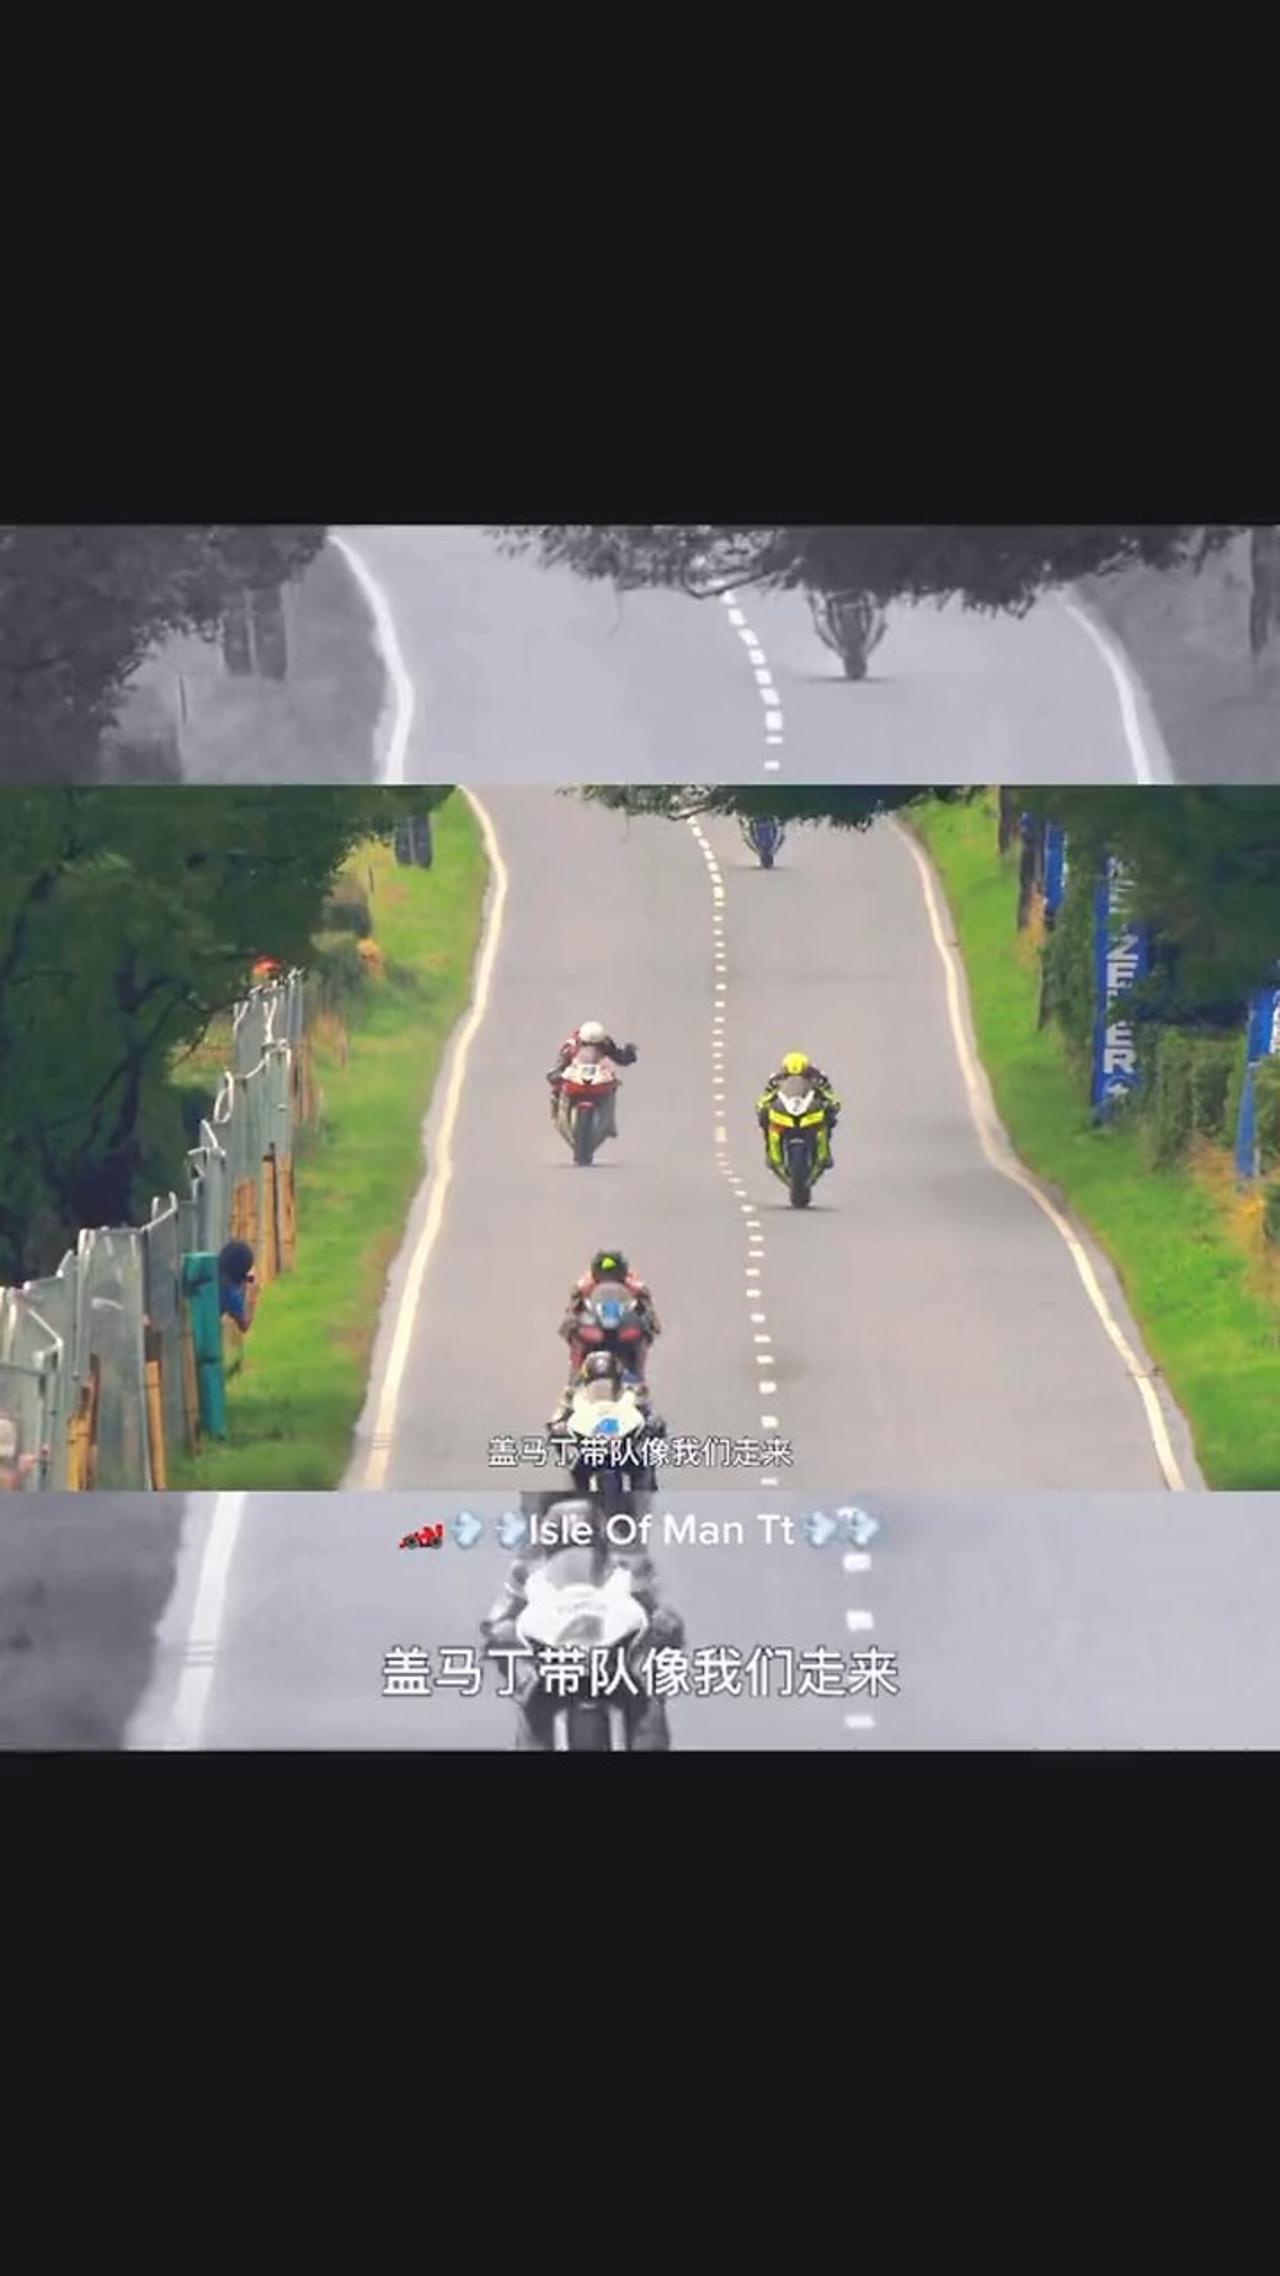 Possibly The Worlds Most Dangerous Motorcycle Road Race?